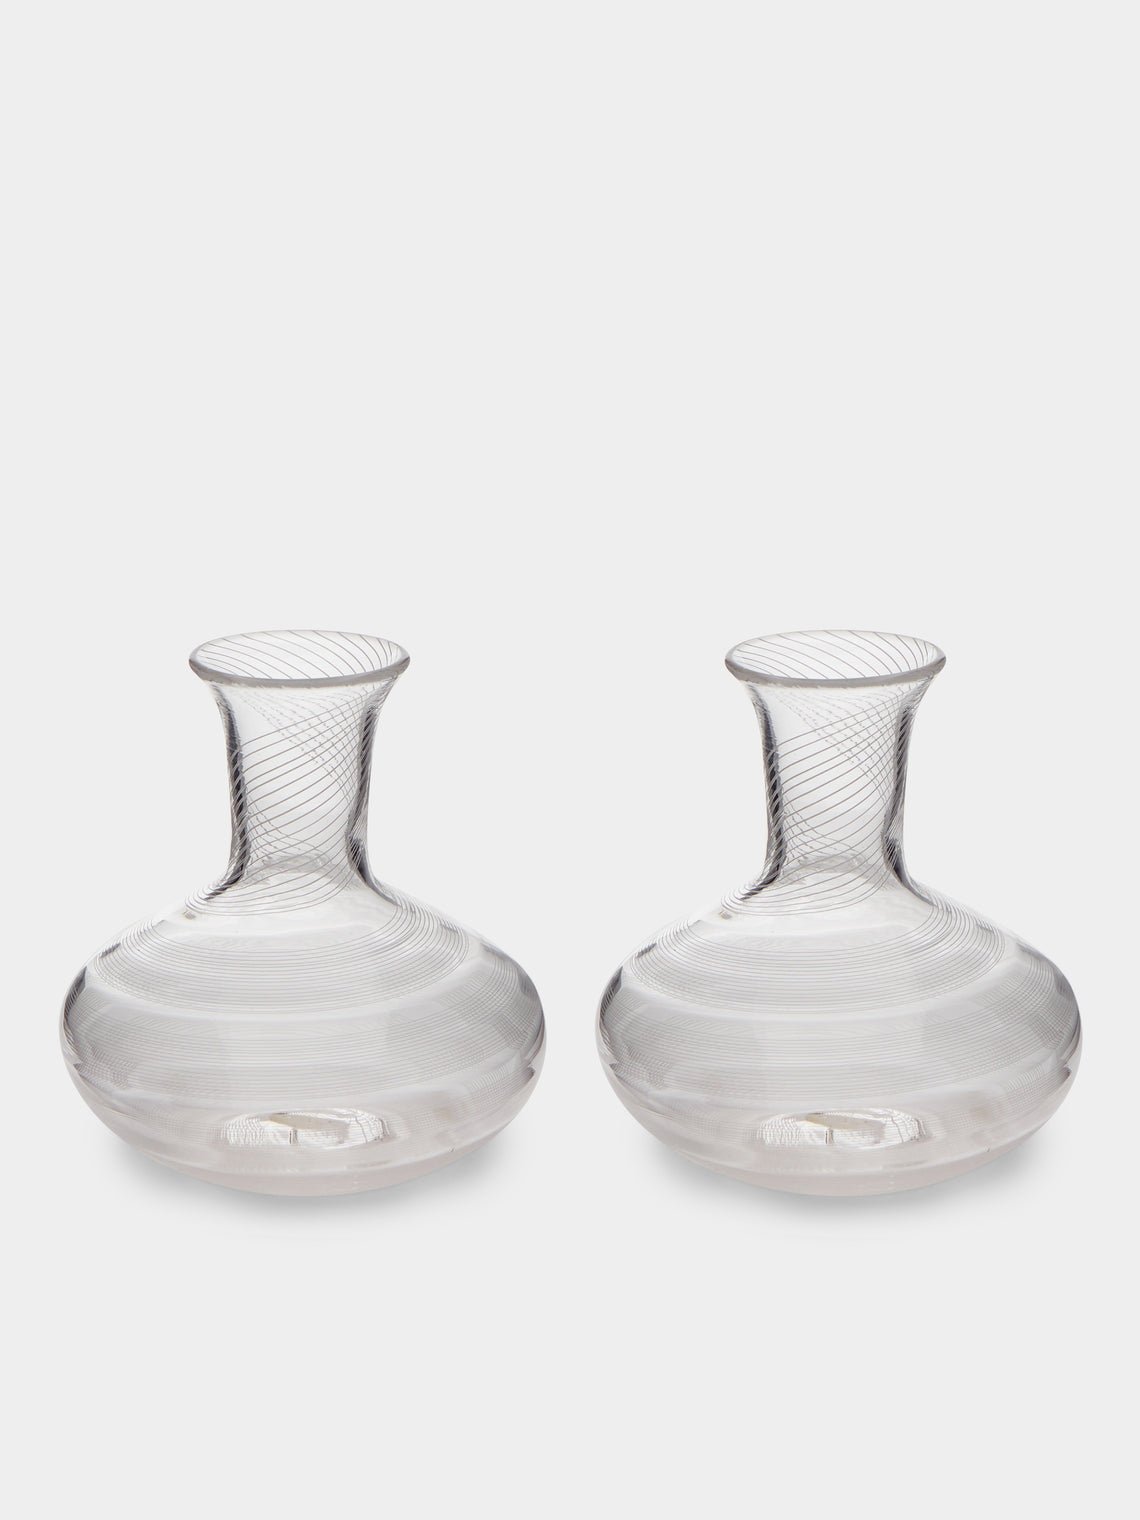 Andrew Iannazzi - Tendril Hand-Blown Glass Bud Vases (Set of 2) -  - ABASK